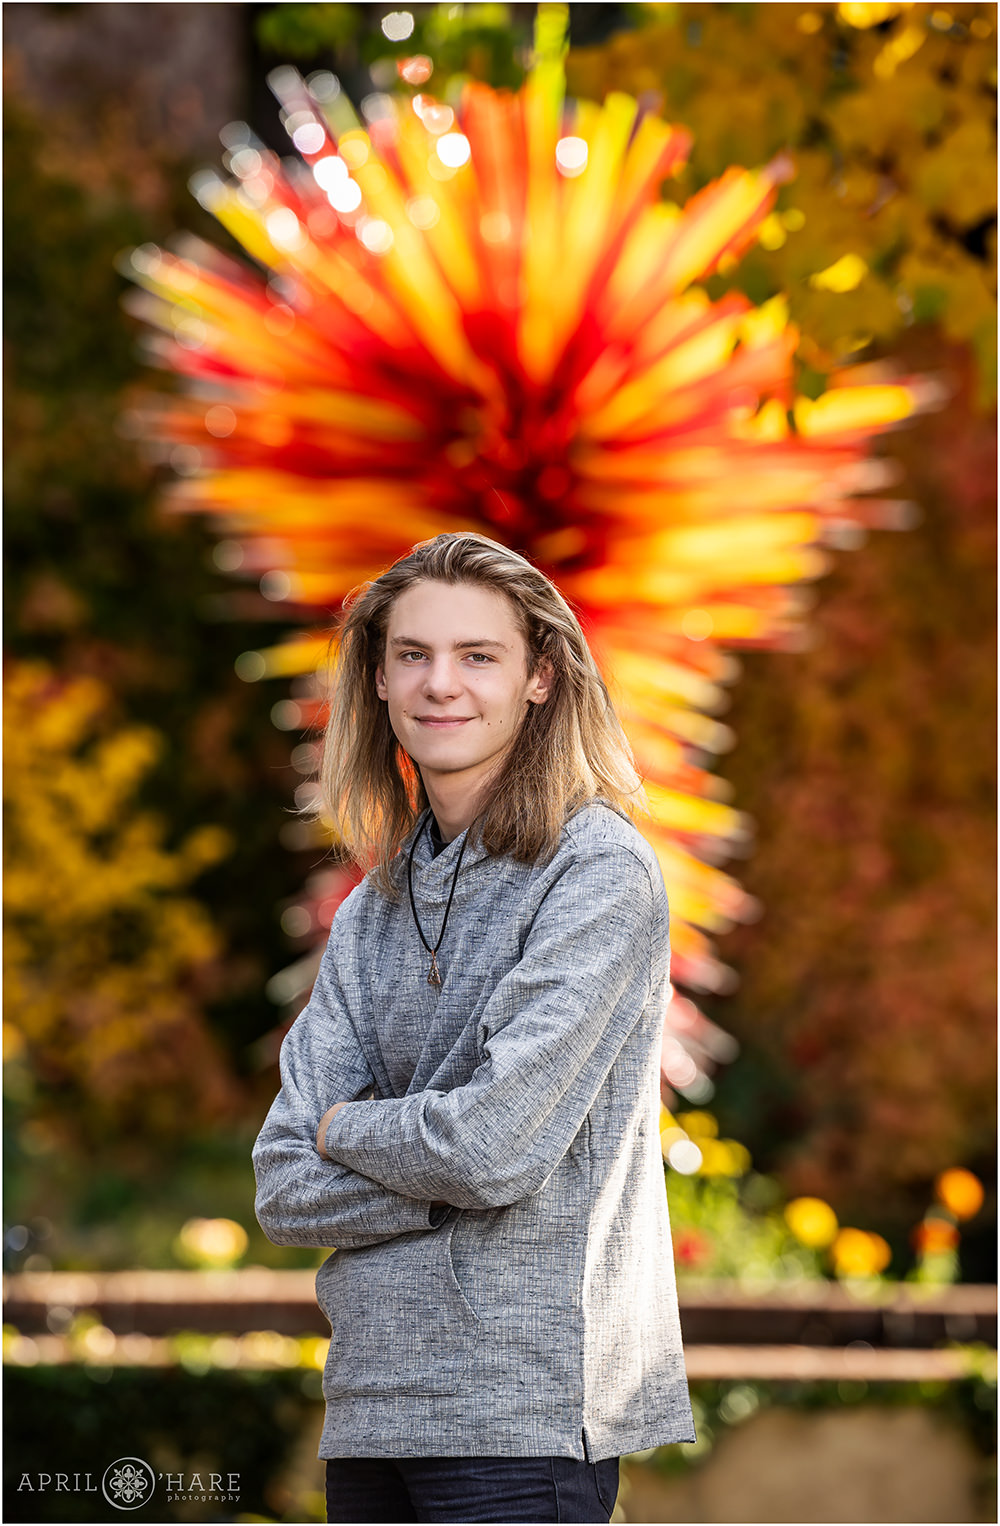 Senior photography with red and yellow Chihuly Sculpture in the backdrop with fall color at an autumn senior photoshoot at Denver Botanic Gardens